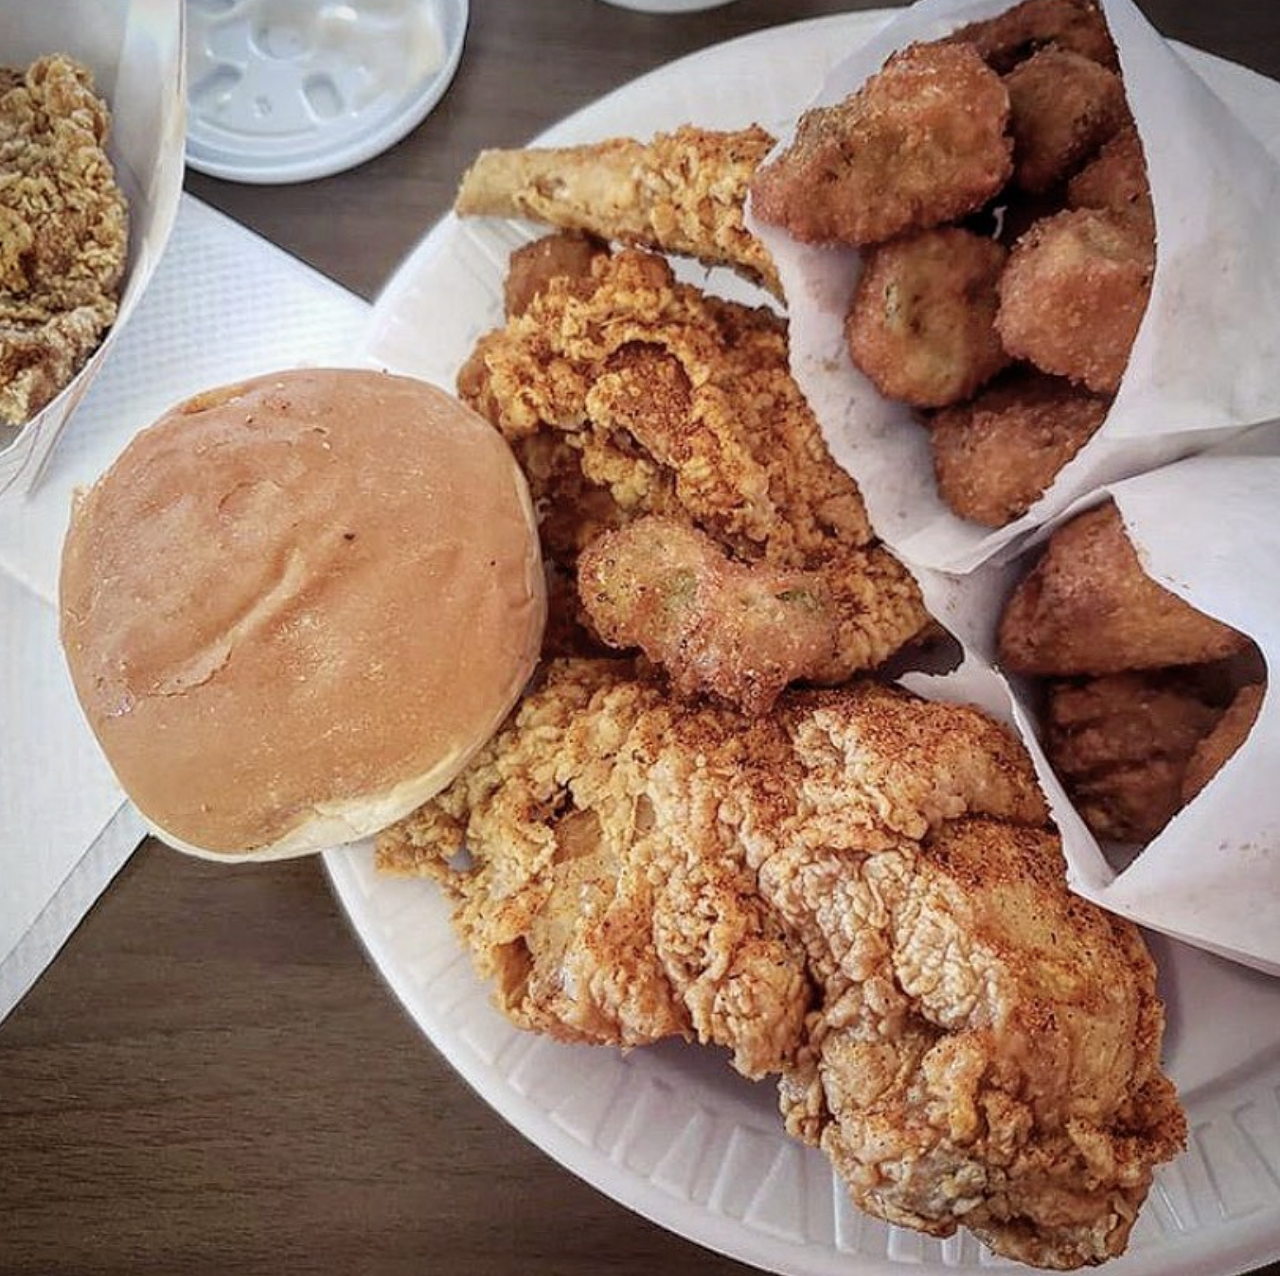 Chatman’s Chicken’s Fried Chicken
1747 S WW White Rd, (210) 359-0245, facebook.com/Chatmans-Chicken
If it’s all-around comfort you’re looking for, the crispy, golden-brown fried yardbird at Chatman’s can’t be beat. What’s more, Mr. Chatman himself is typically on hand to offer a warm greeting and a smile. 
Photo via Instagram /  chatmanschicken